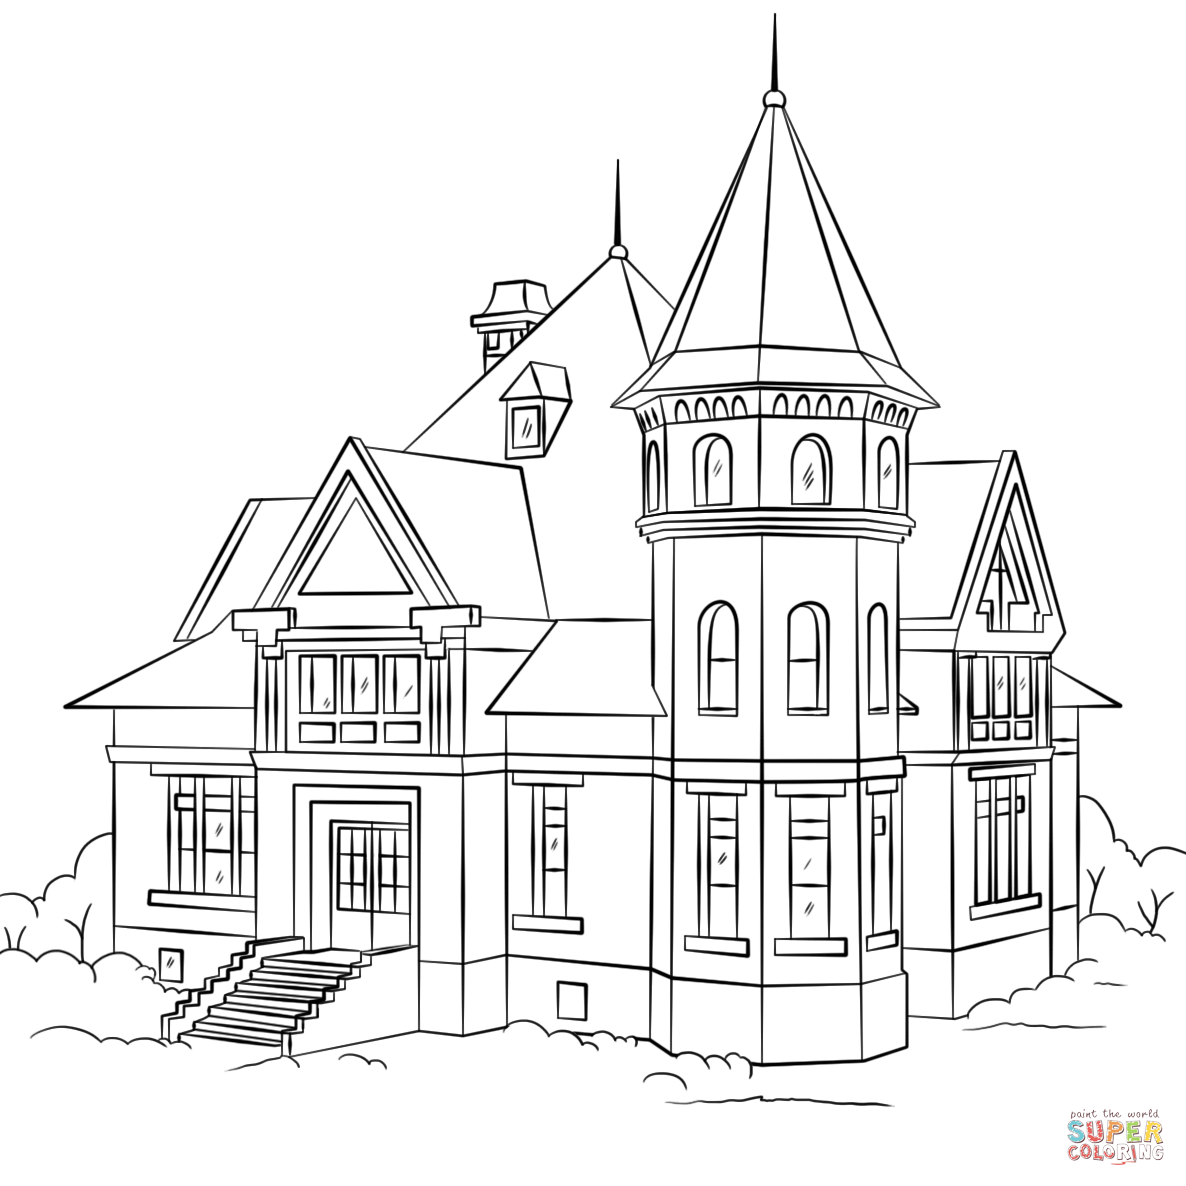 Download or print this amazing coloring page: Victorian ...